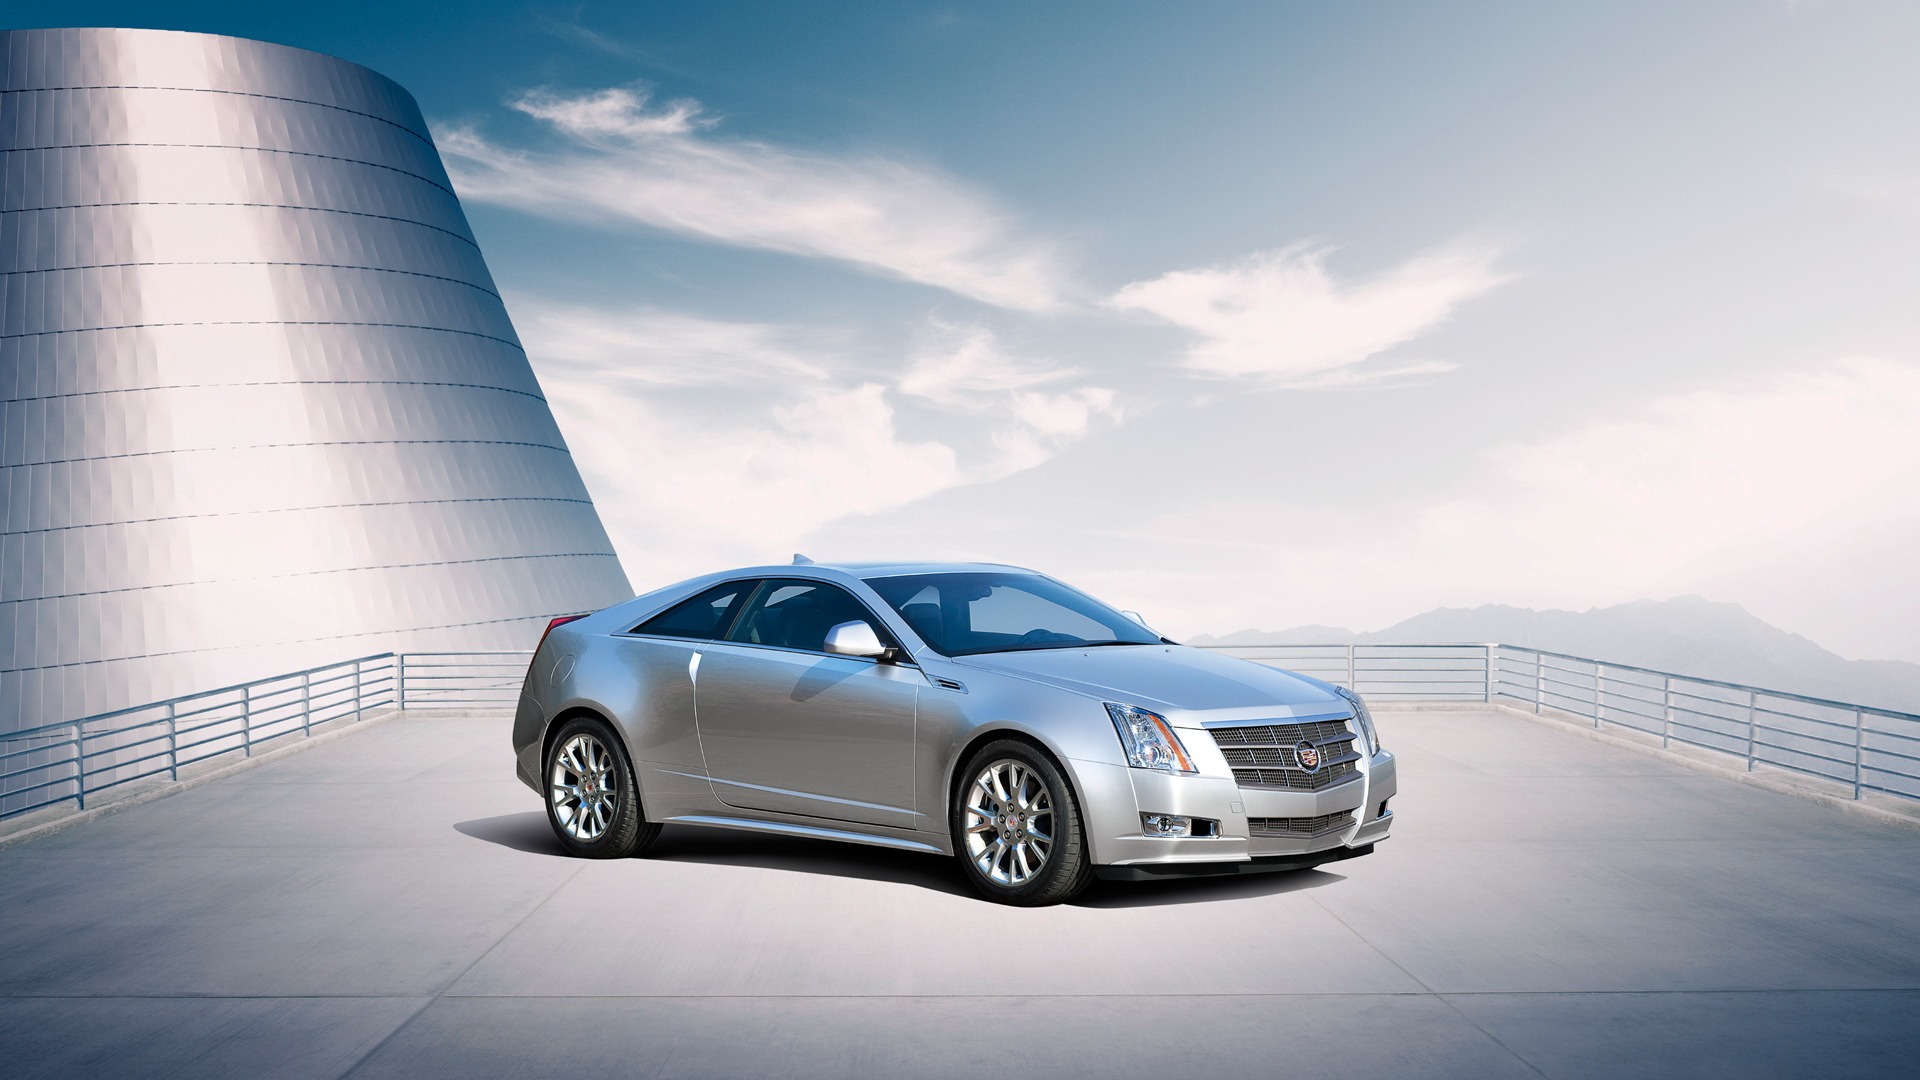 Cadillac CTS Coupe - 2011 HD Wallpaper #11 - 1920x1080